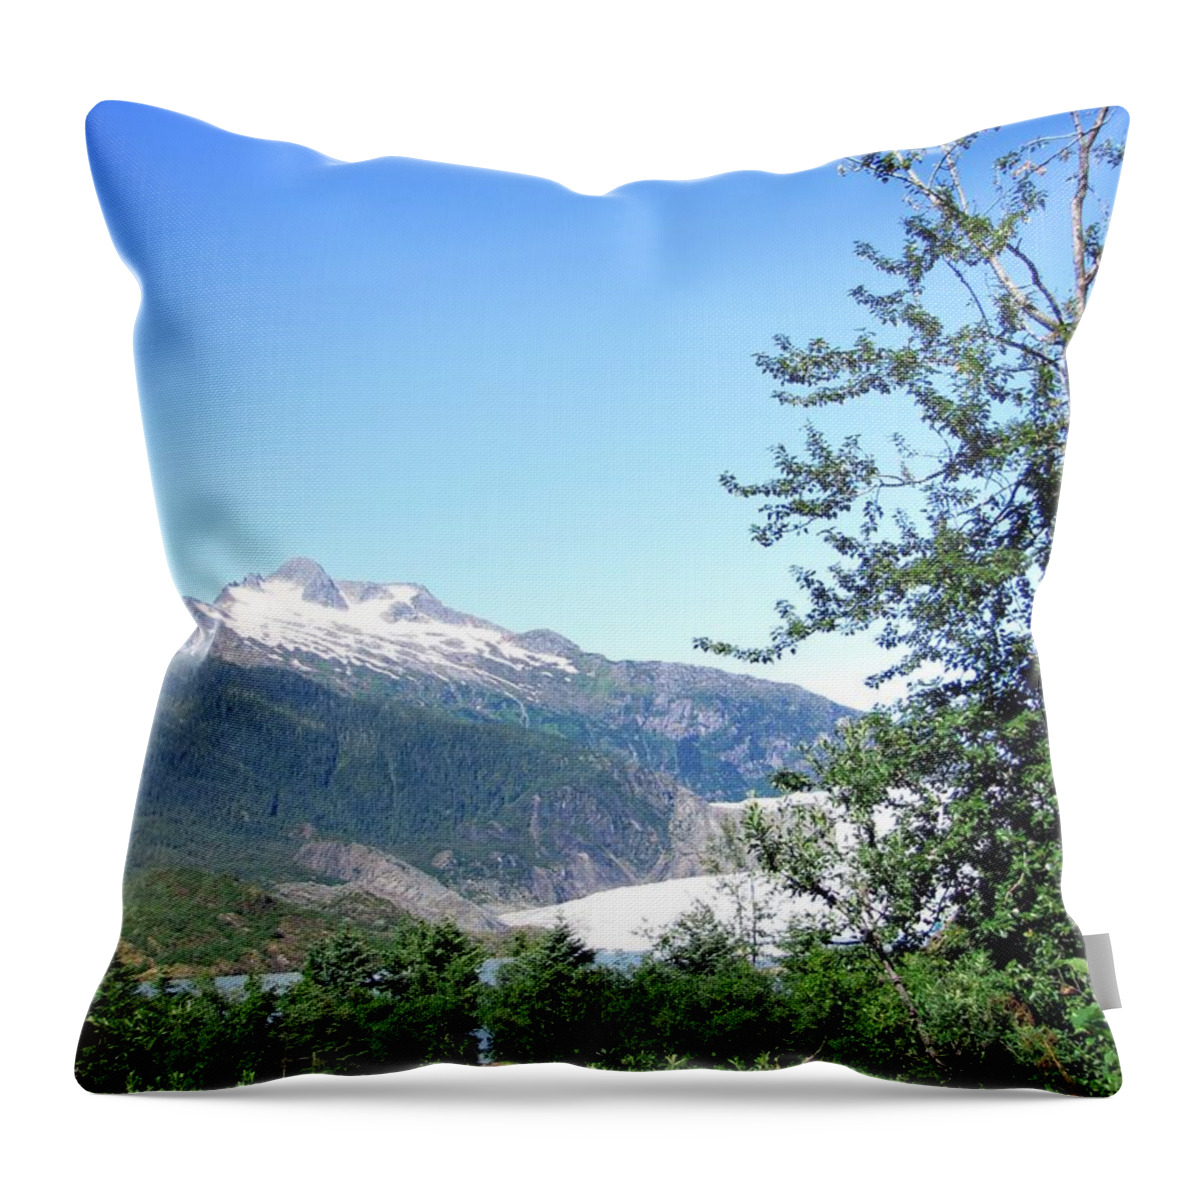 Mendenhall Glacier Throw Pillow featuring the photograph Mendenhall Glacier by Jennifer Wheatley Wolf